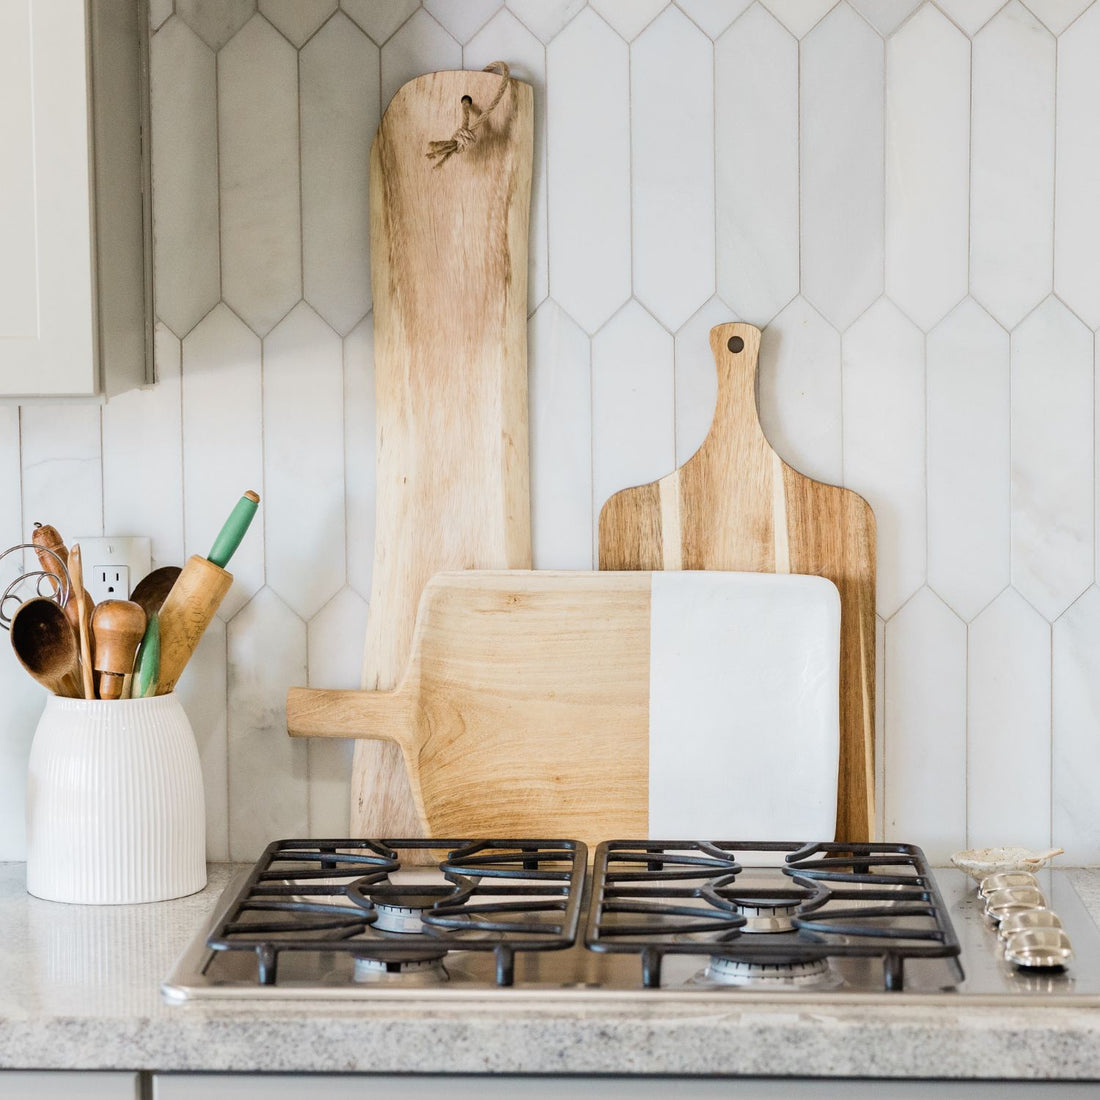 How to Display Cutting Boards on Kitchen Counter - Interior Design Tips